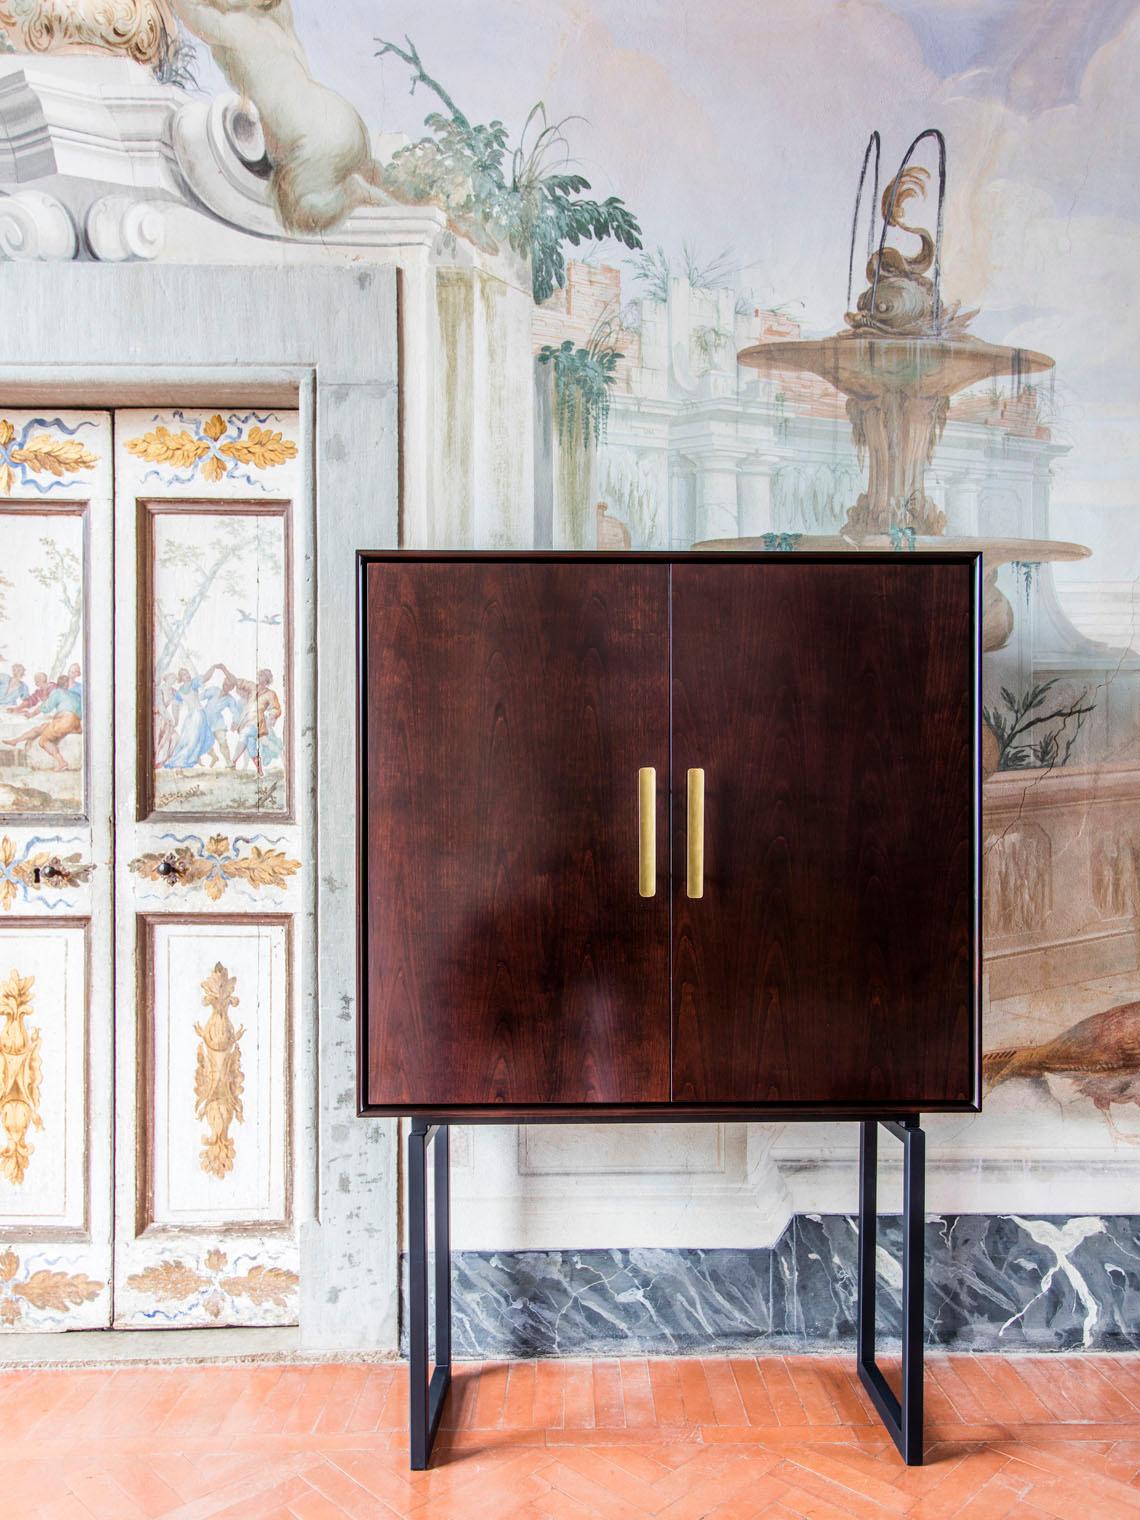 Our classical bar cabinet evokes the times when a drink before dinner was common practice. Behind the cherry wood doors opens an elegant interior with glass shelves and a antique mirror back. 

Available in different woods or varnished in a color